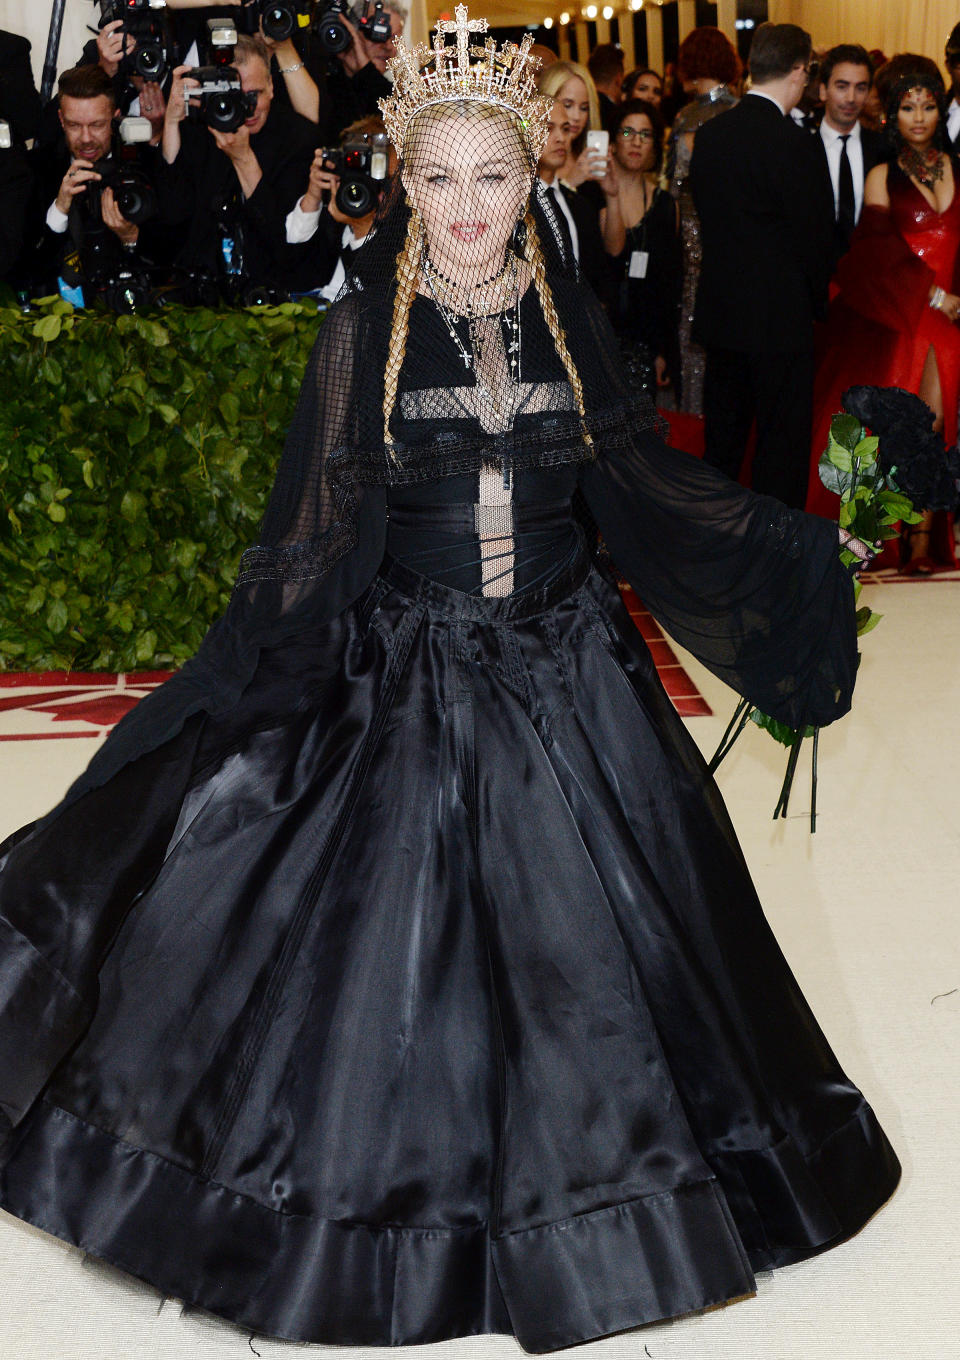 <span><span>Madonna, The Metropolitan Museum of Art's Costume Institute Benefit celebrating the opening of Heavenly Bodies: Fashion and the Catholic Imagination</span><span>Broadimage/Shutterstock</span></span>